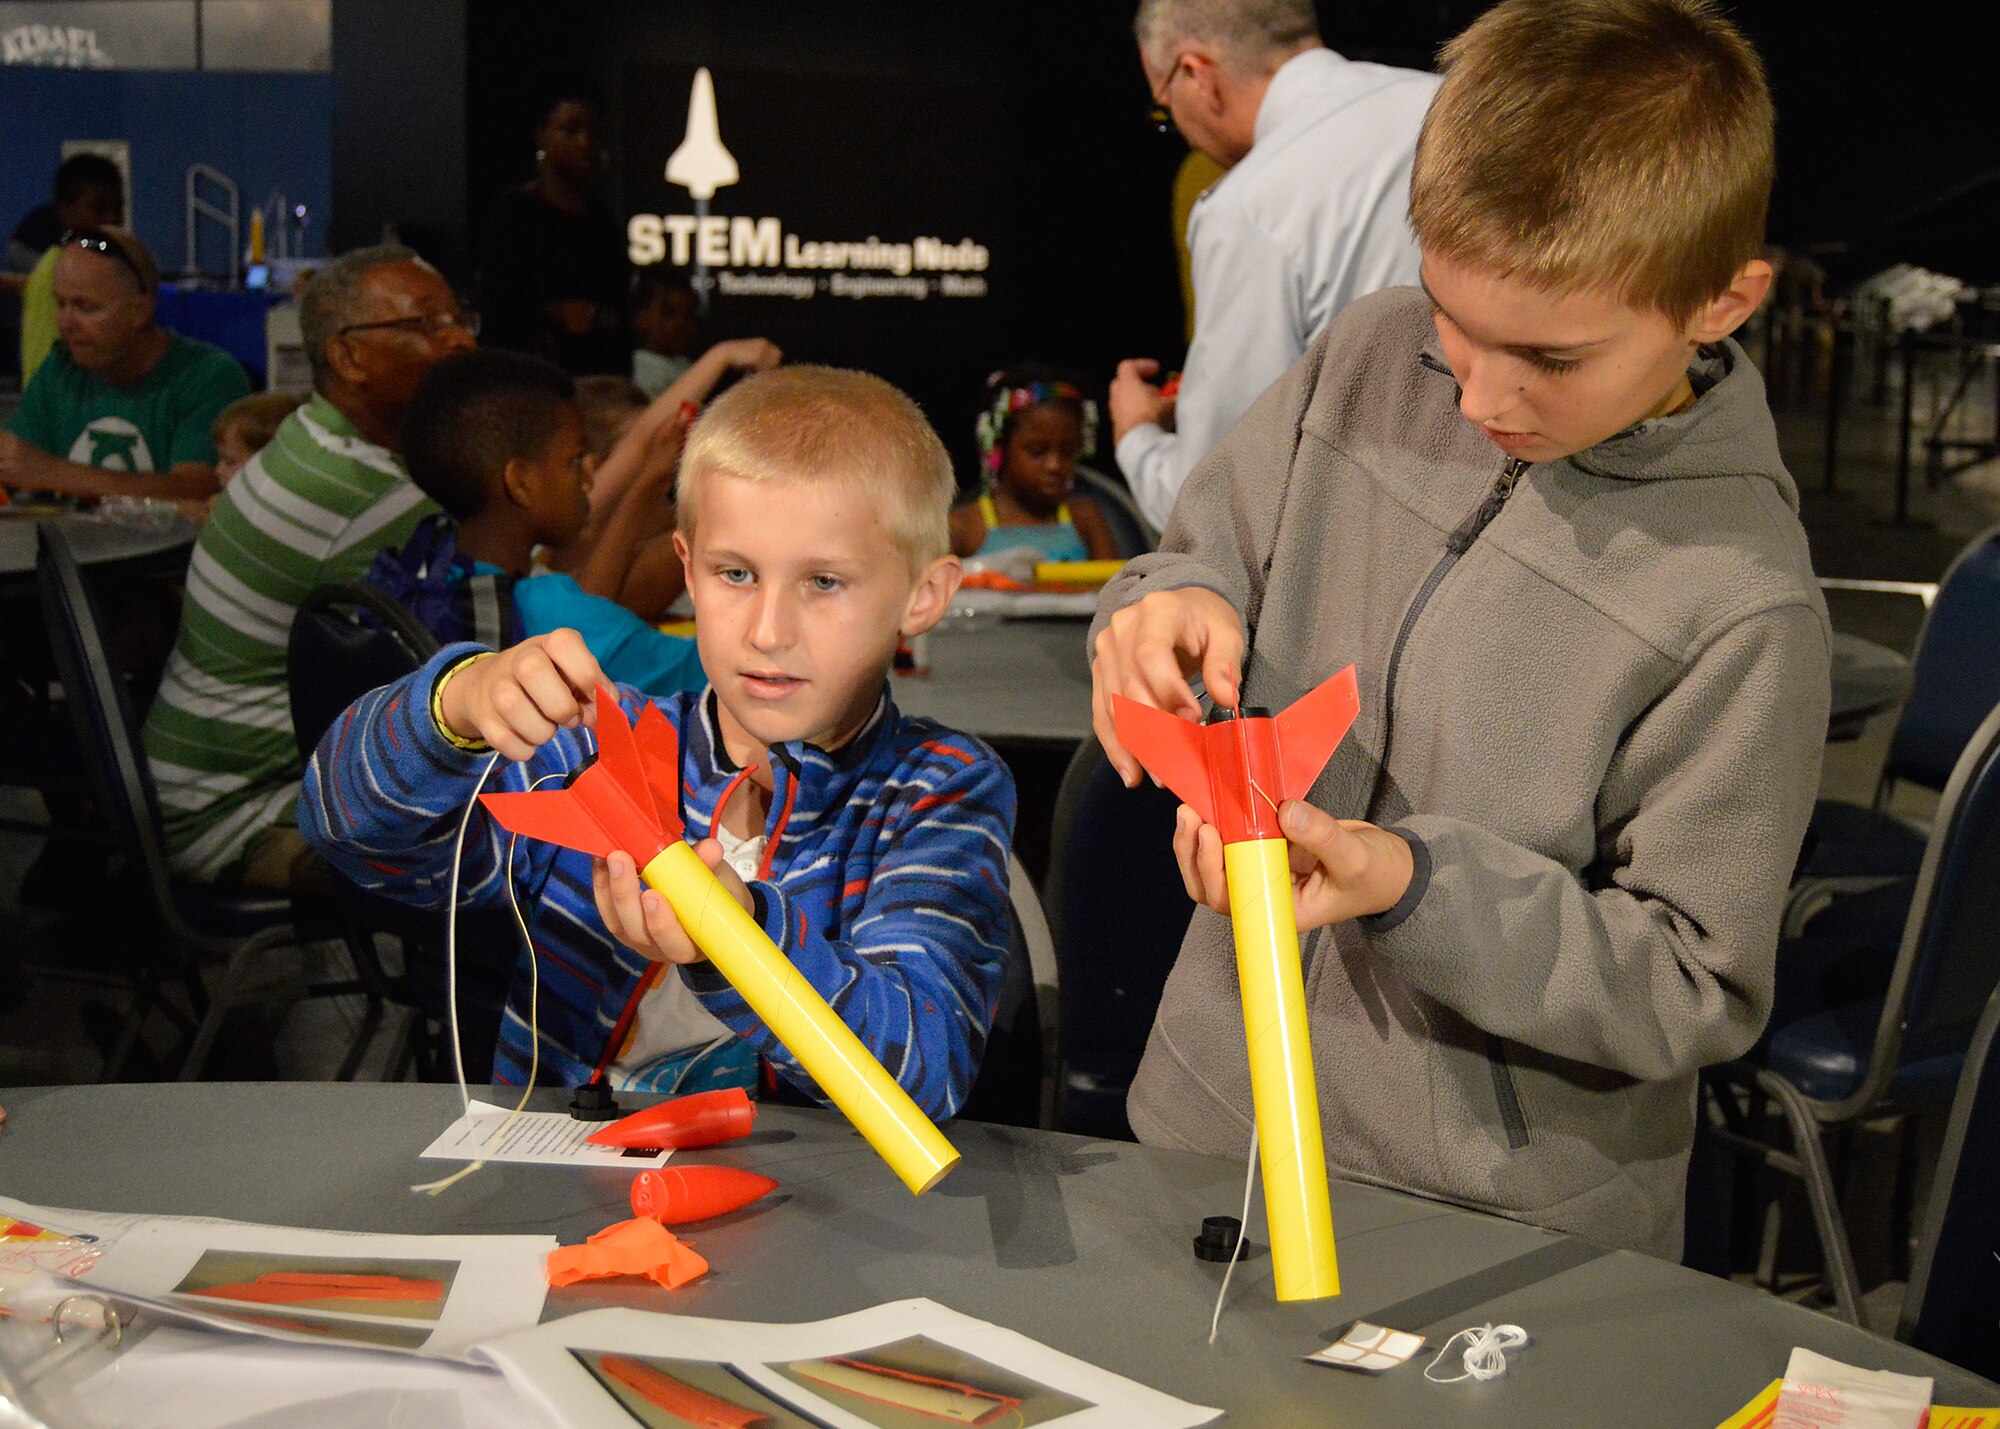 DAYTON, Ohio (05/2015) -- Participants enjoyed a number of hands-on activities during Space Fest on May 15-16 at the National Museum of the U.S. Air Force. (U.S. Air Force photo by Ken LaRock)